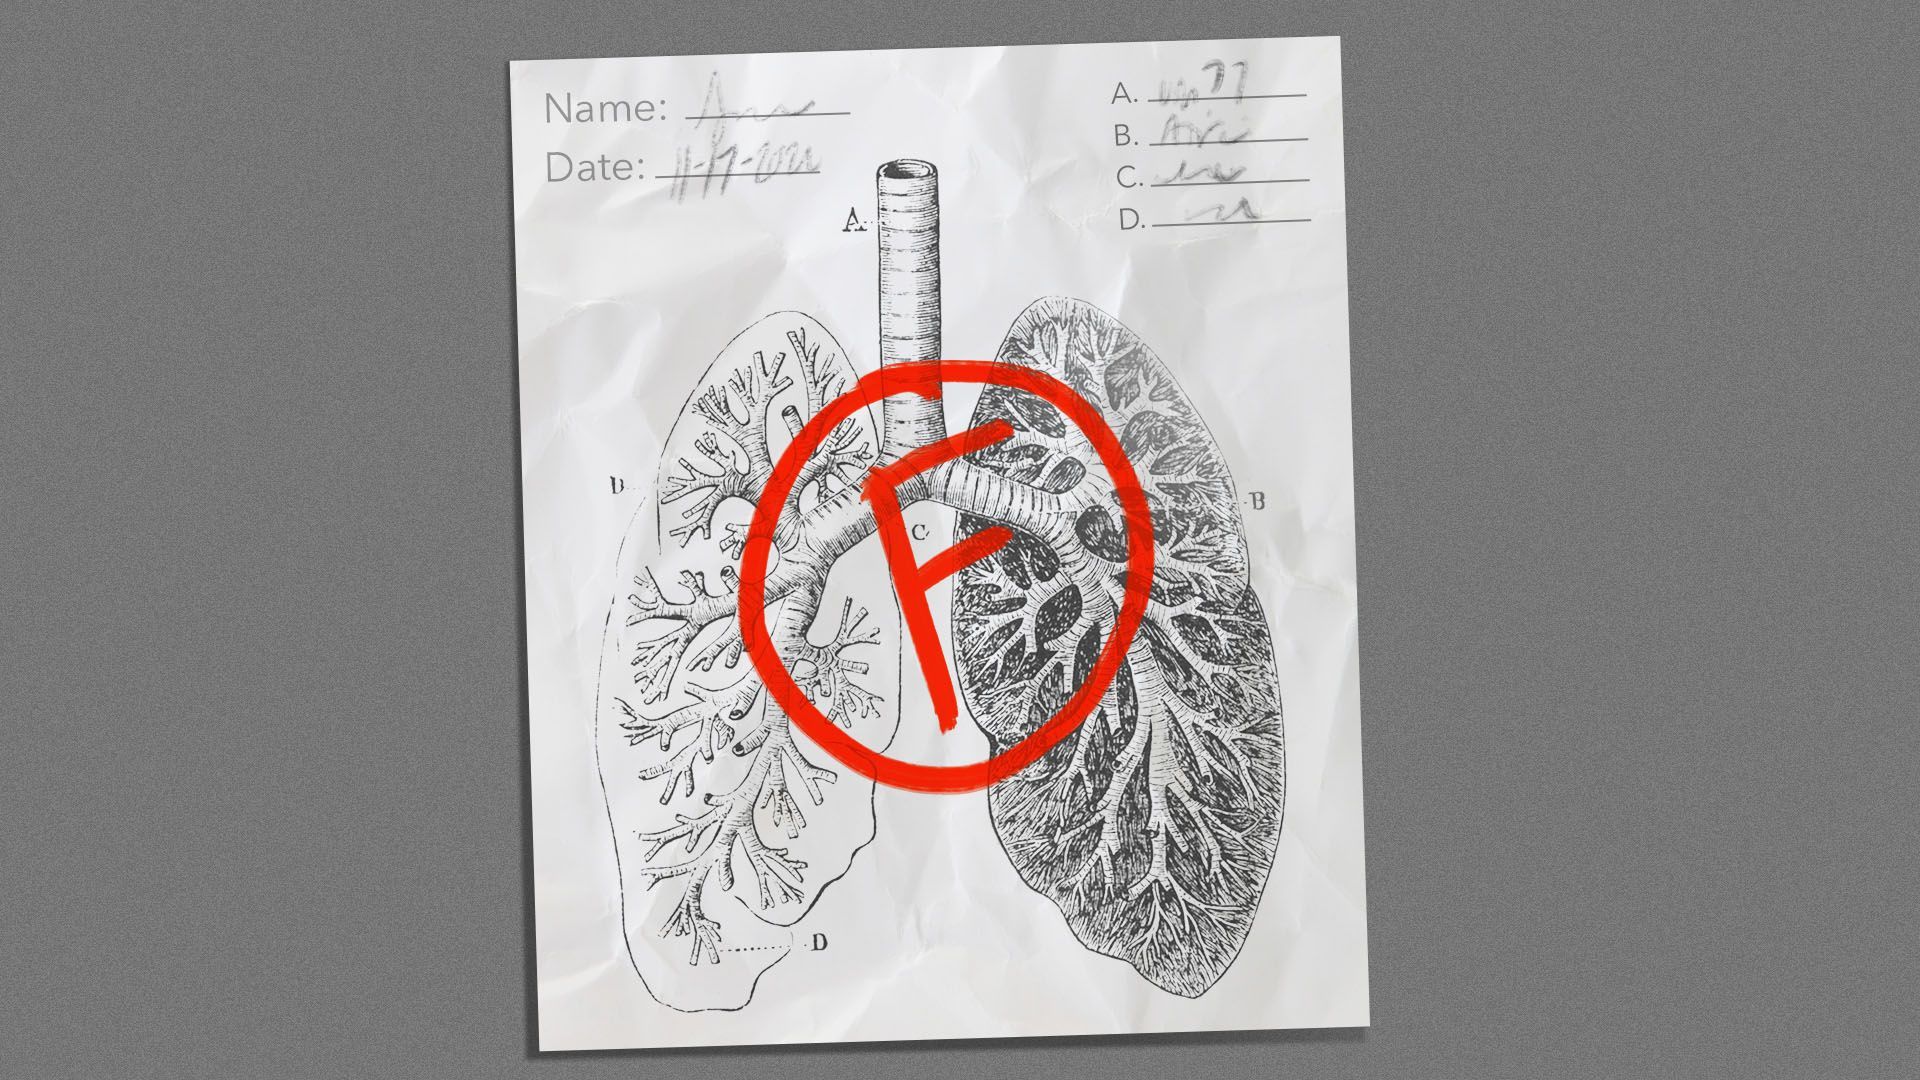 Illustration of a test featuring a pair of lungs with an F on it